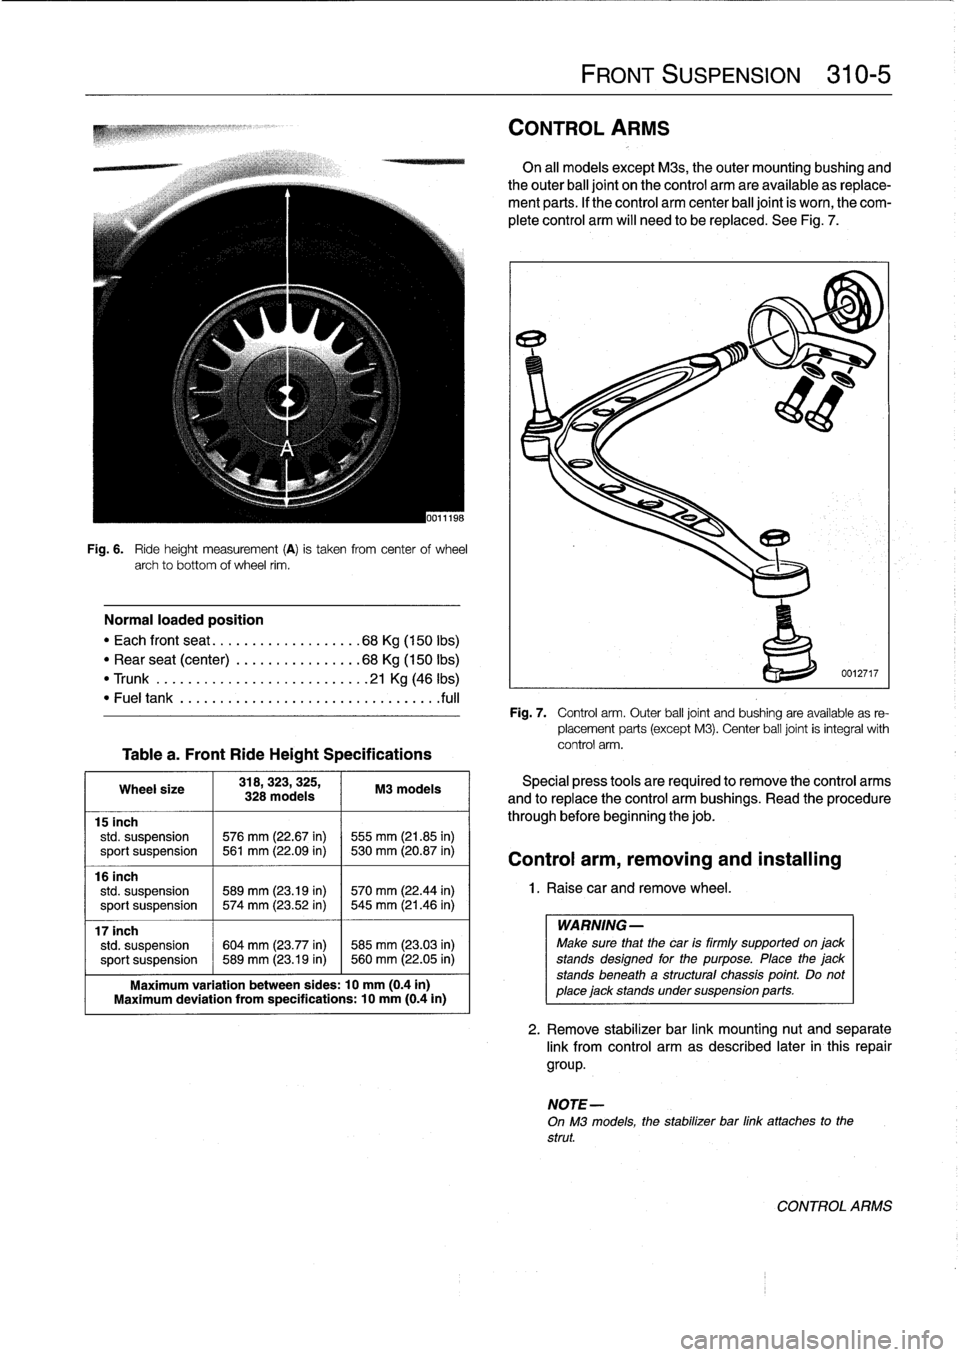 BMW M3 1996 E36 Workshop Manual 
Fig
.
6
.

	

Ride
height
measurement
(A)
is
taken
from
centerof
wheel
archto
bottom
of
wheel
rim
.

Normal
loaded
position

"
Each
front
seat
...
...
.
..
..........
68Kg
(150
Ibs)

"
Rear
seat
(cen